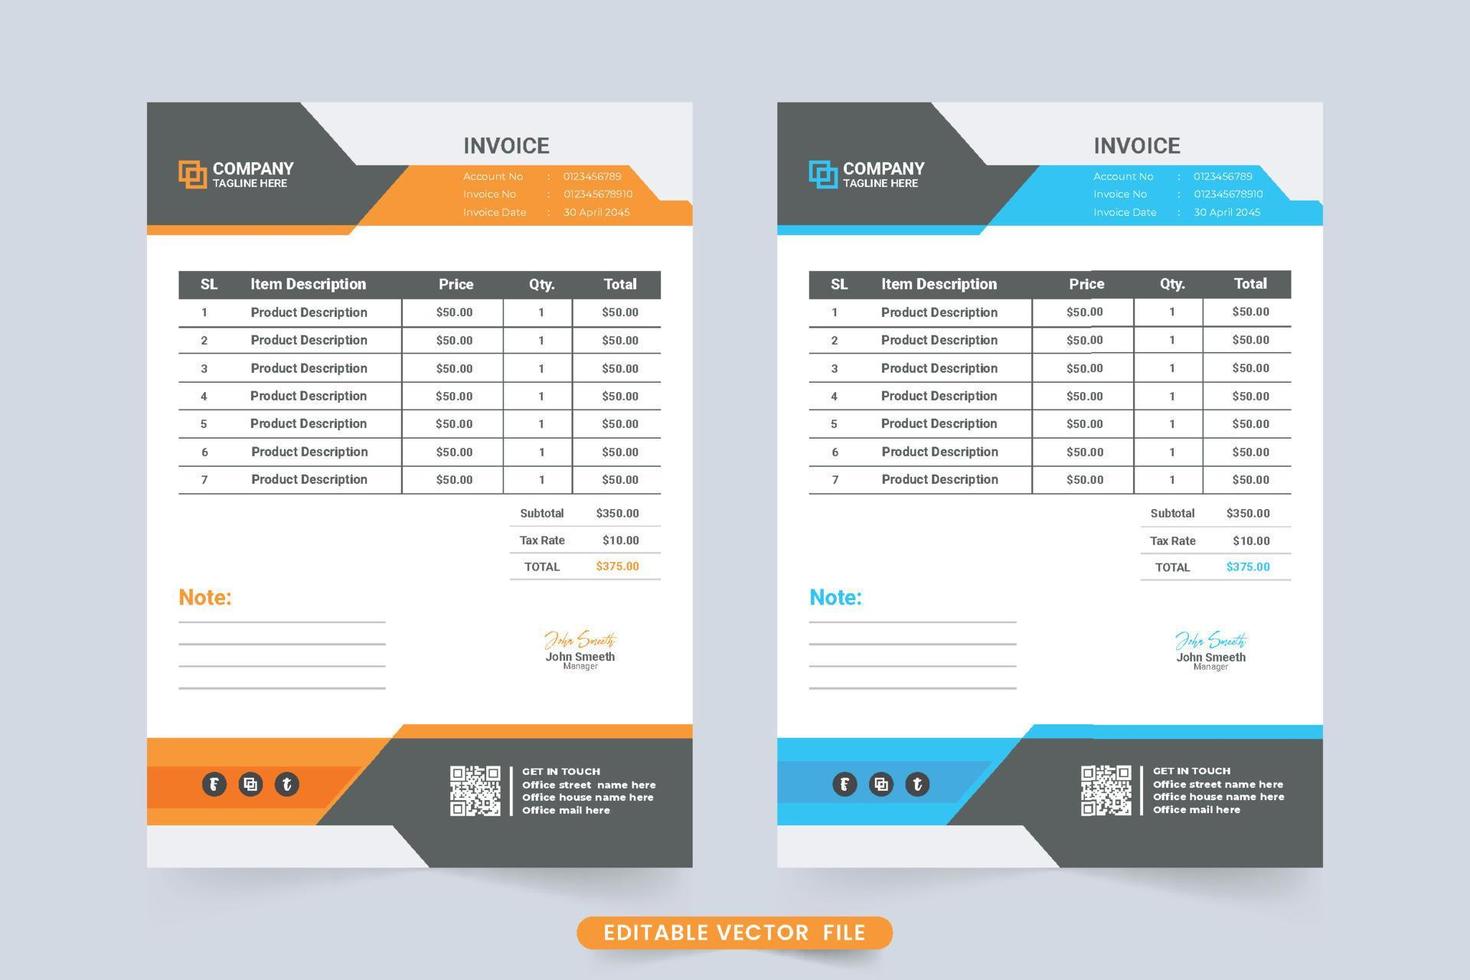 Print ready business invoice decoration with abstract shapes. Modern Invoice and voucher element design with orange and blue colors. Professional corporate invoice and cash receipt vector. vector